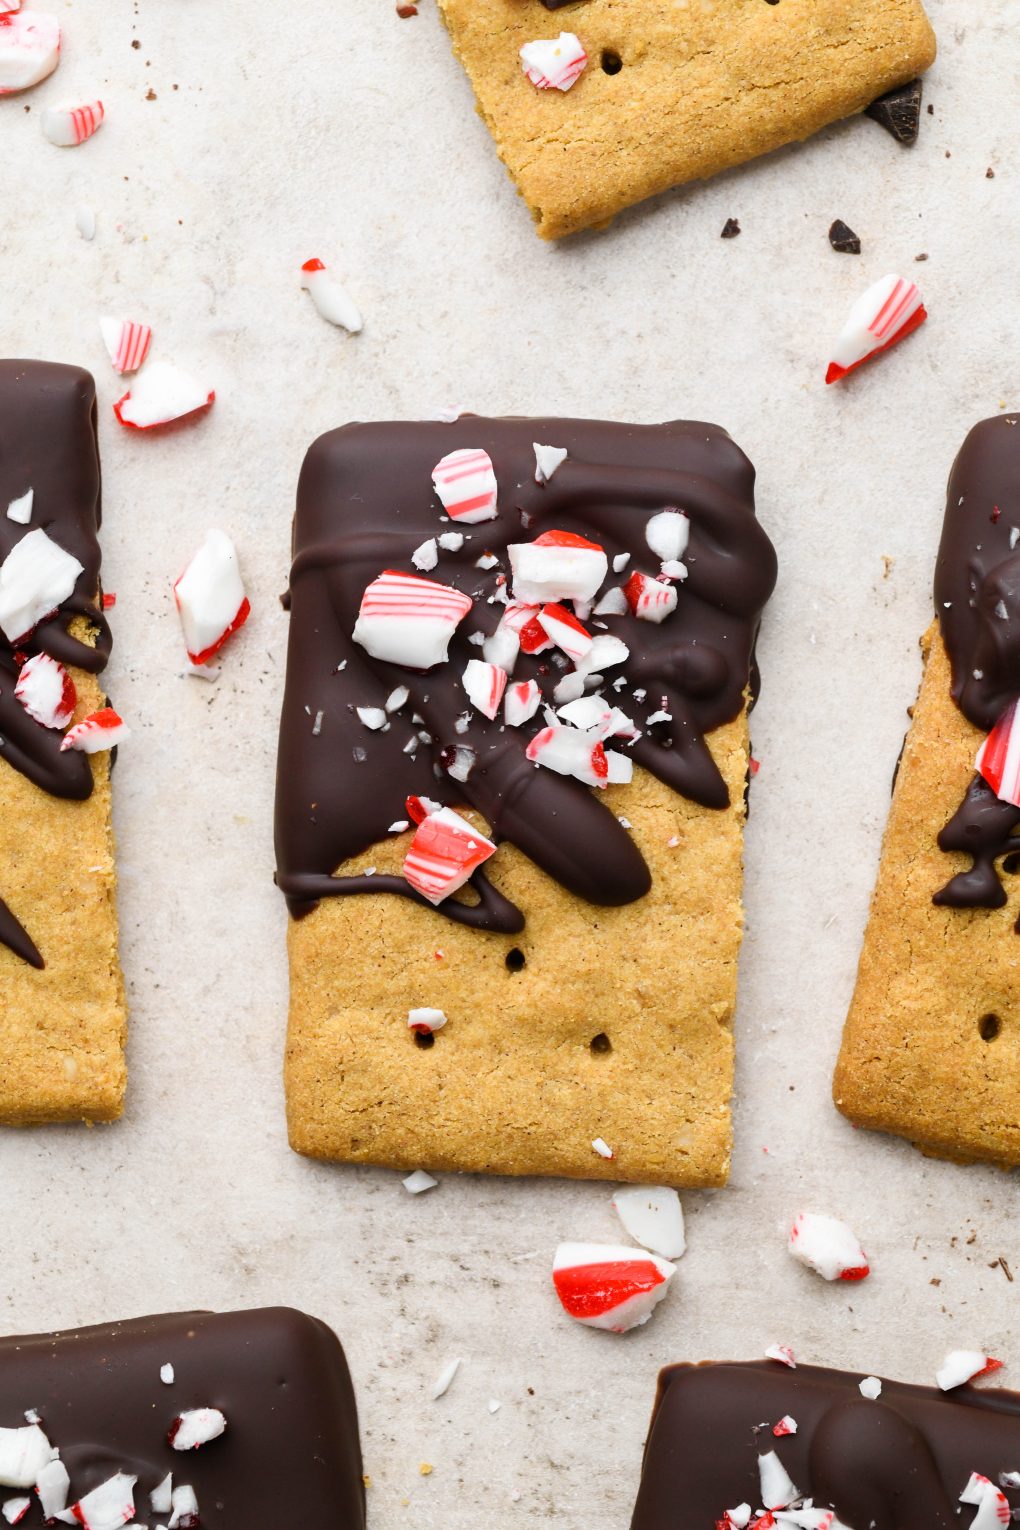 Chocolate dipped graham crackers topped with crushed candy canes on a light brown surface.